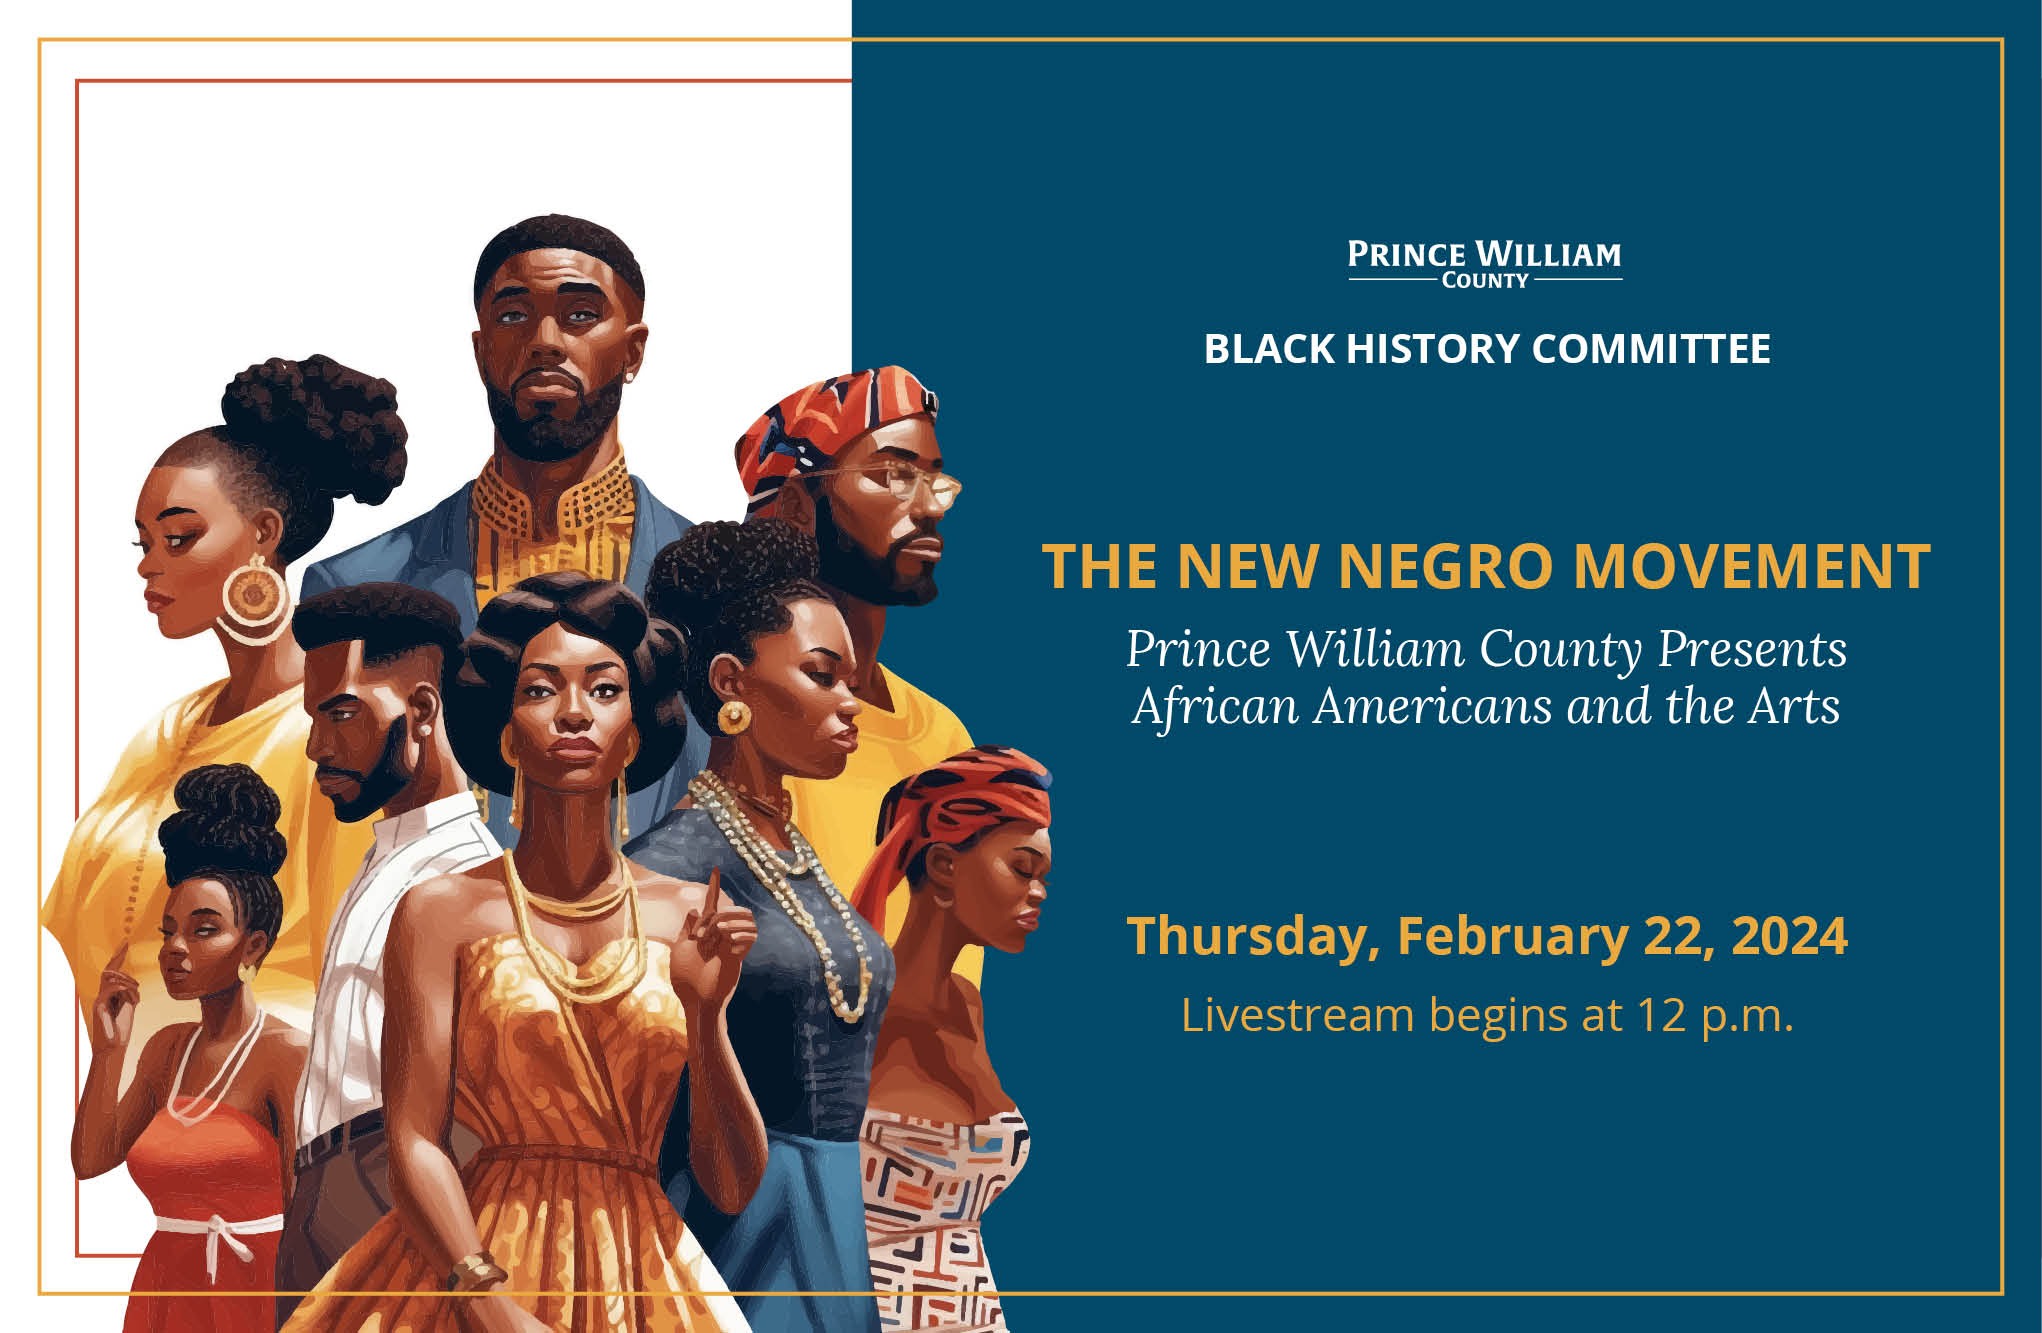 Prince William County is Hosting Several Events to Celebrate Black History Month